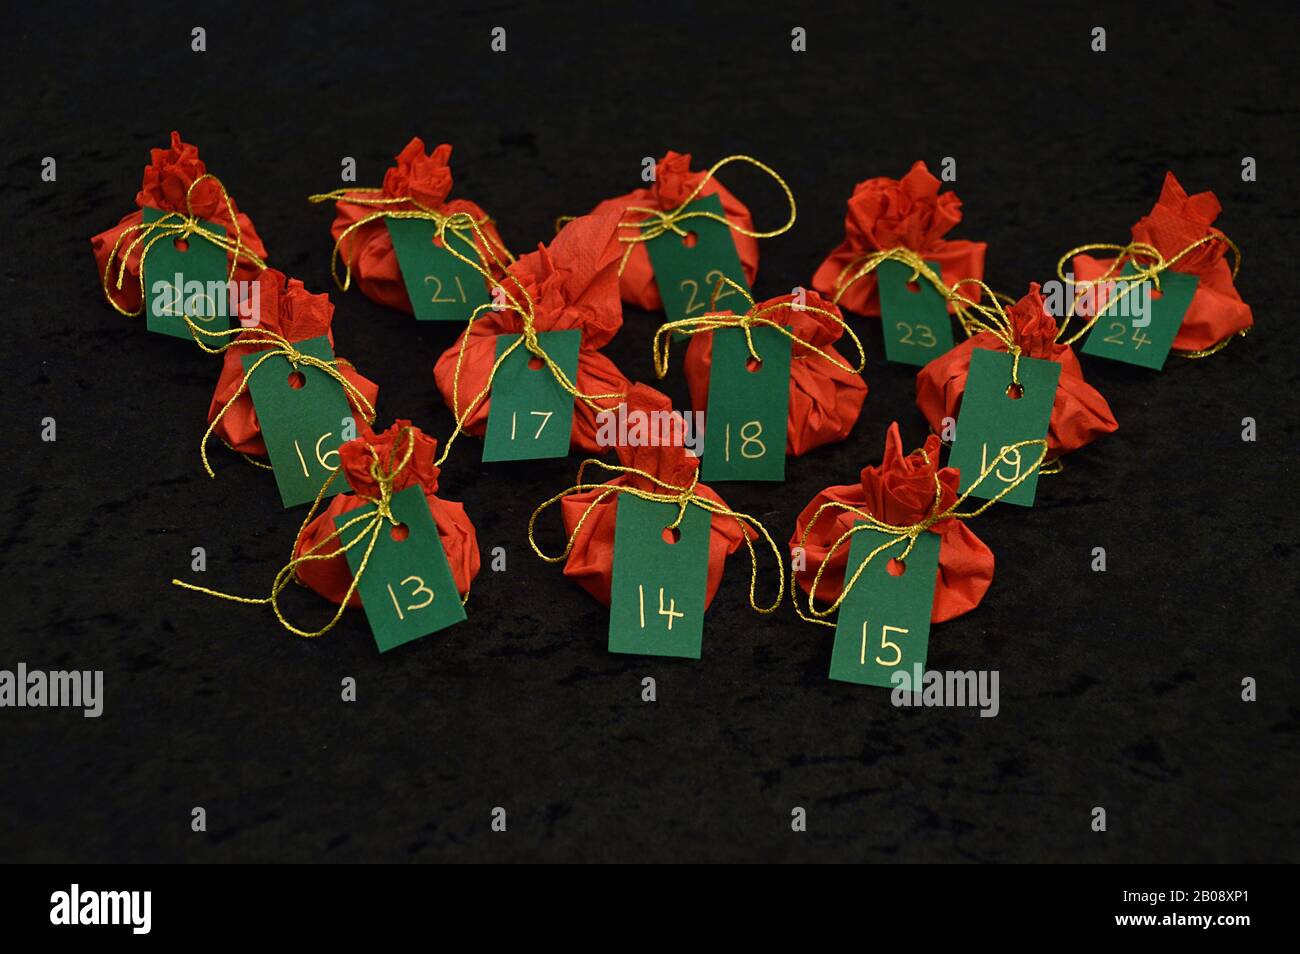 Twenty four little presents wrapped in red, green tags golden numbers from 1 to 24 on black as self made advent calendar - 13th of December Stock Photo